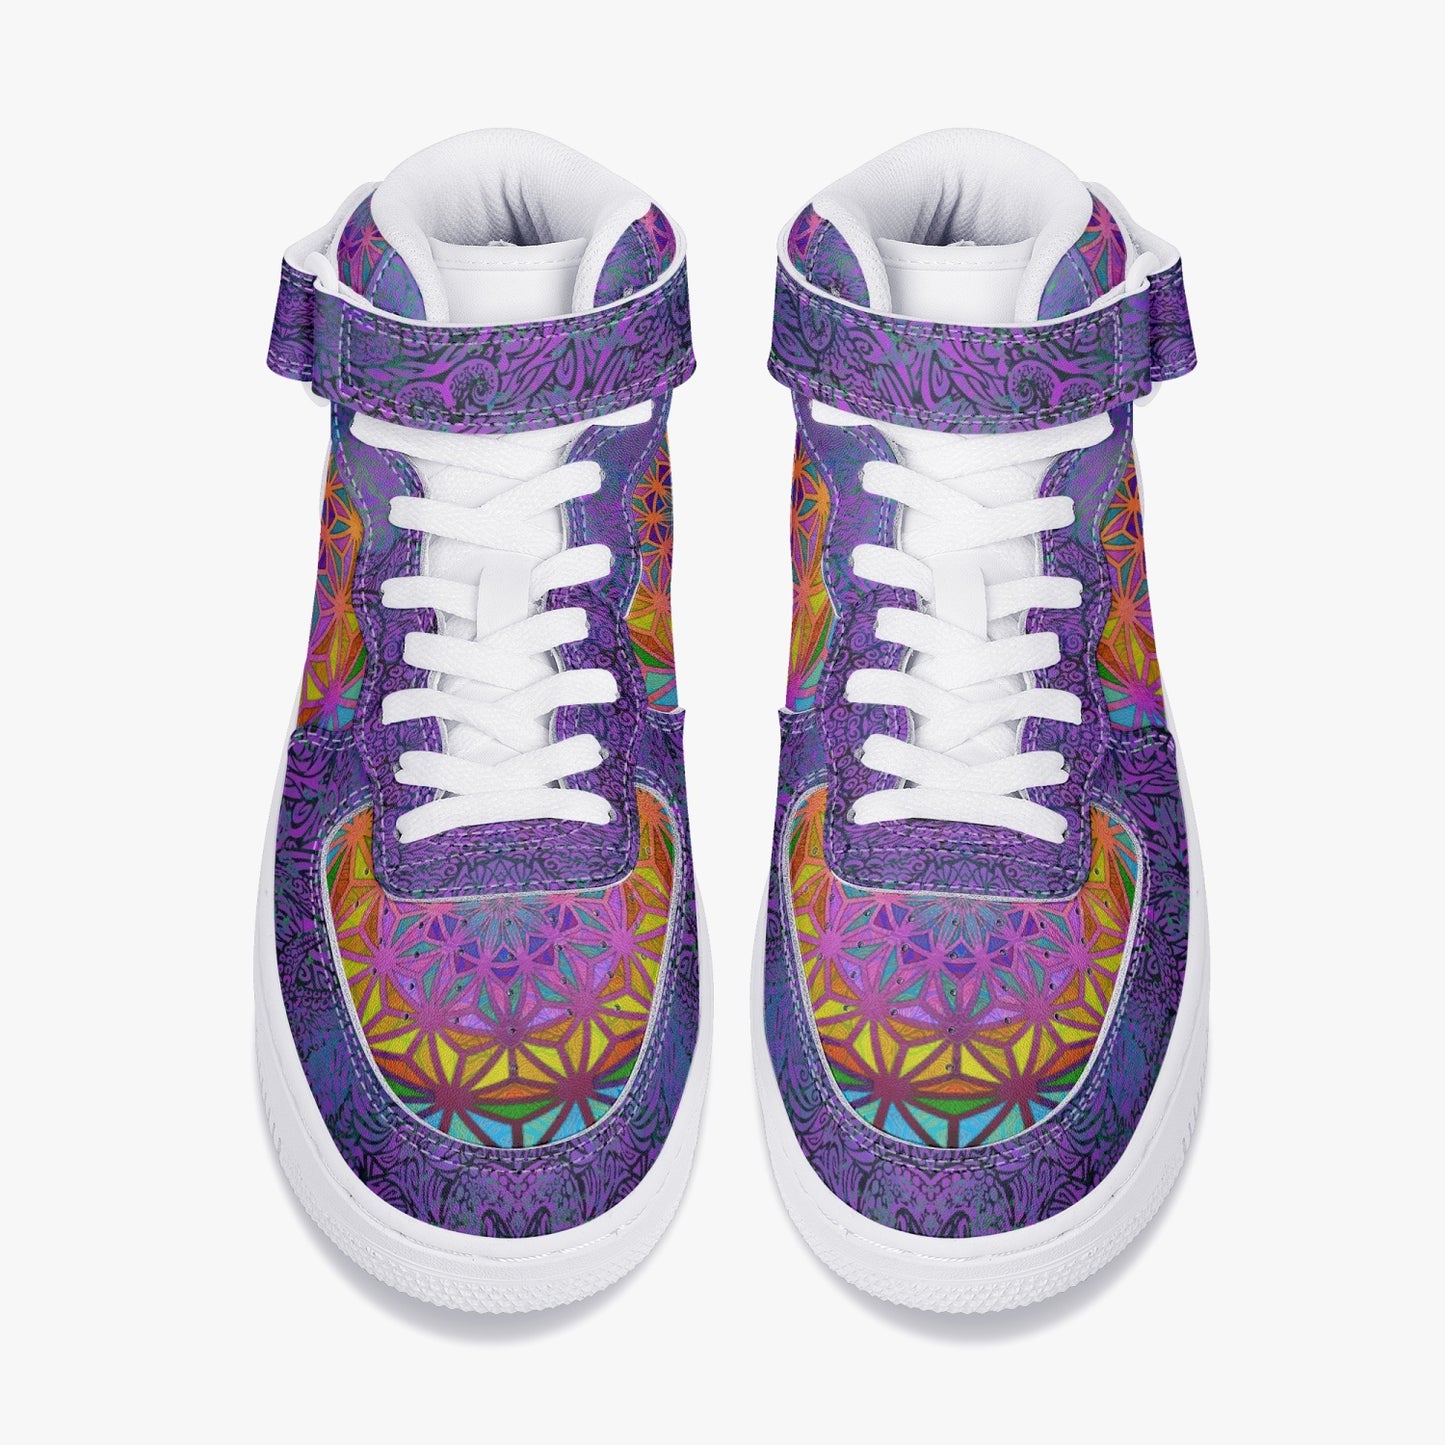 Birth of a Flower High-Top Sneakers